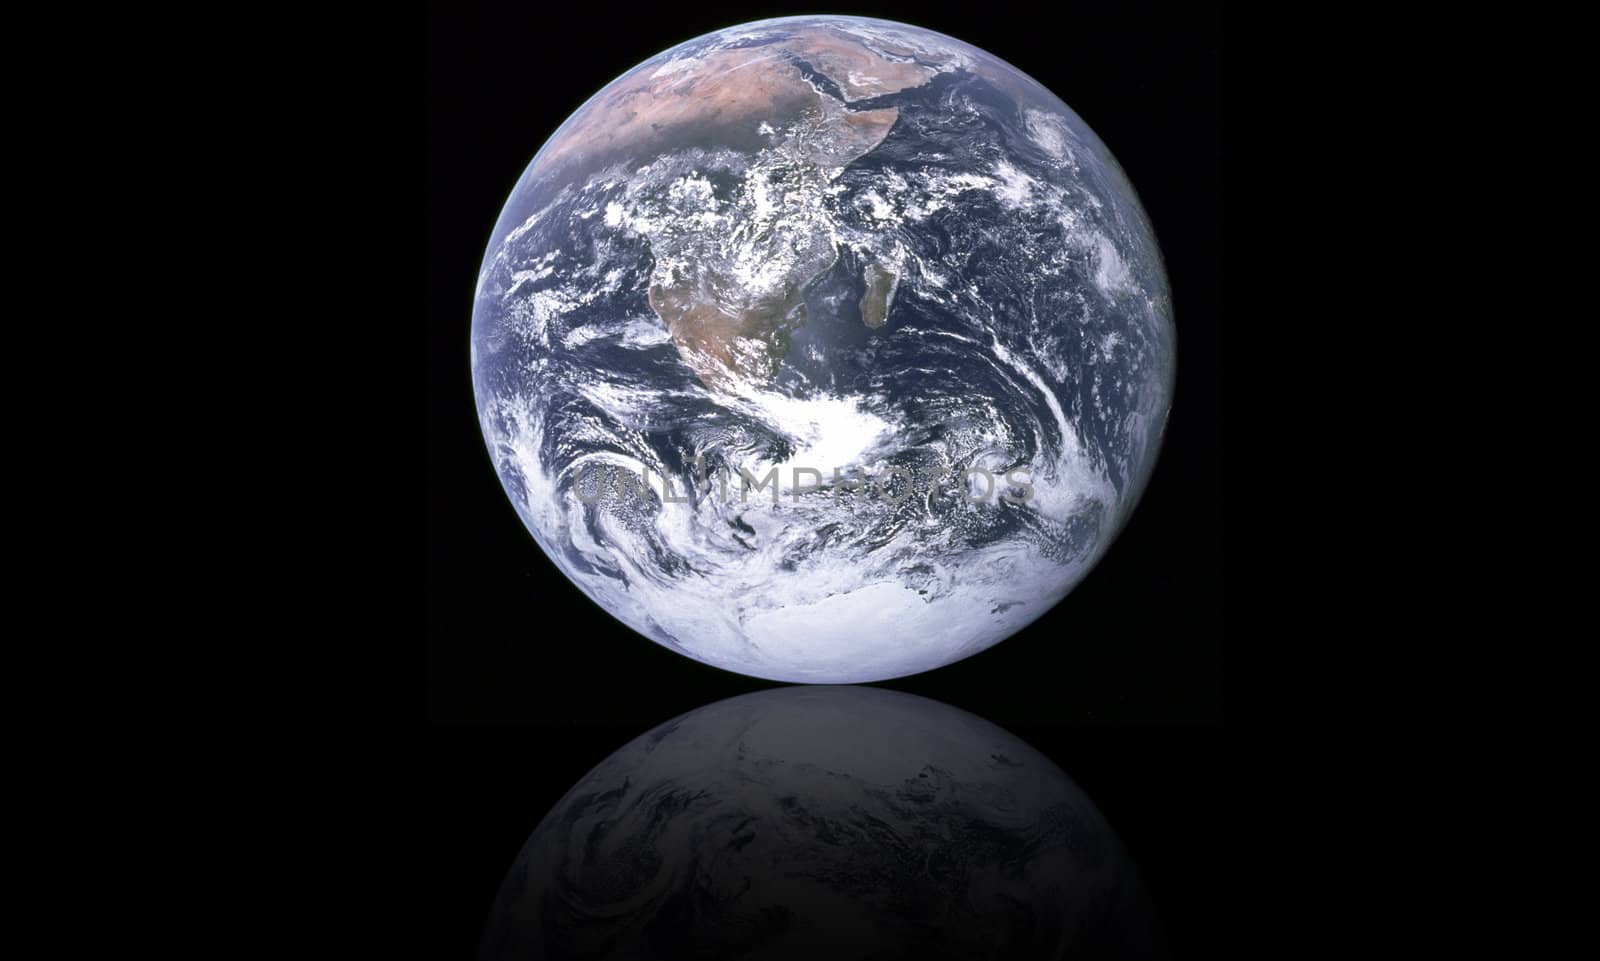 planet earth and its reflection on black